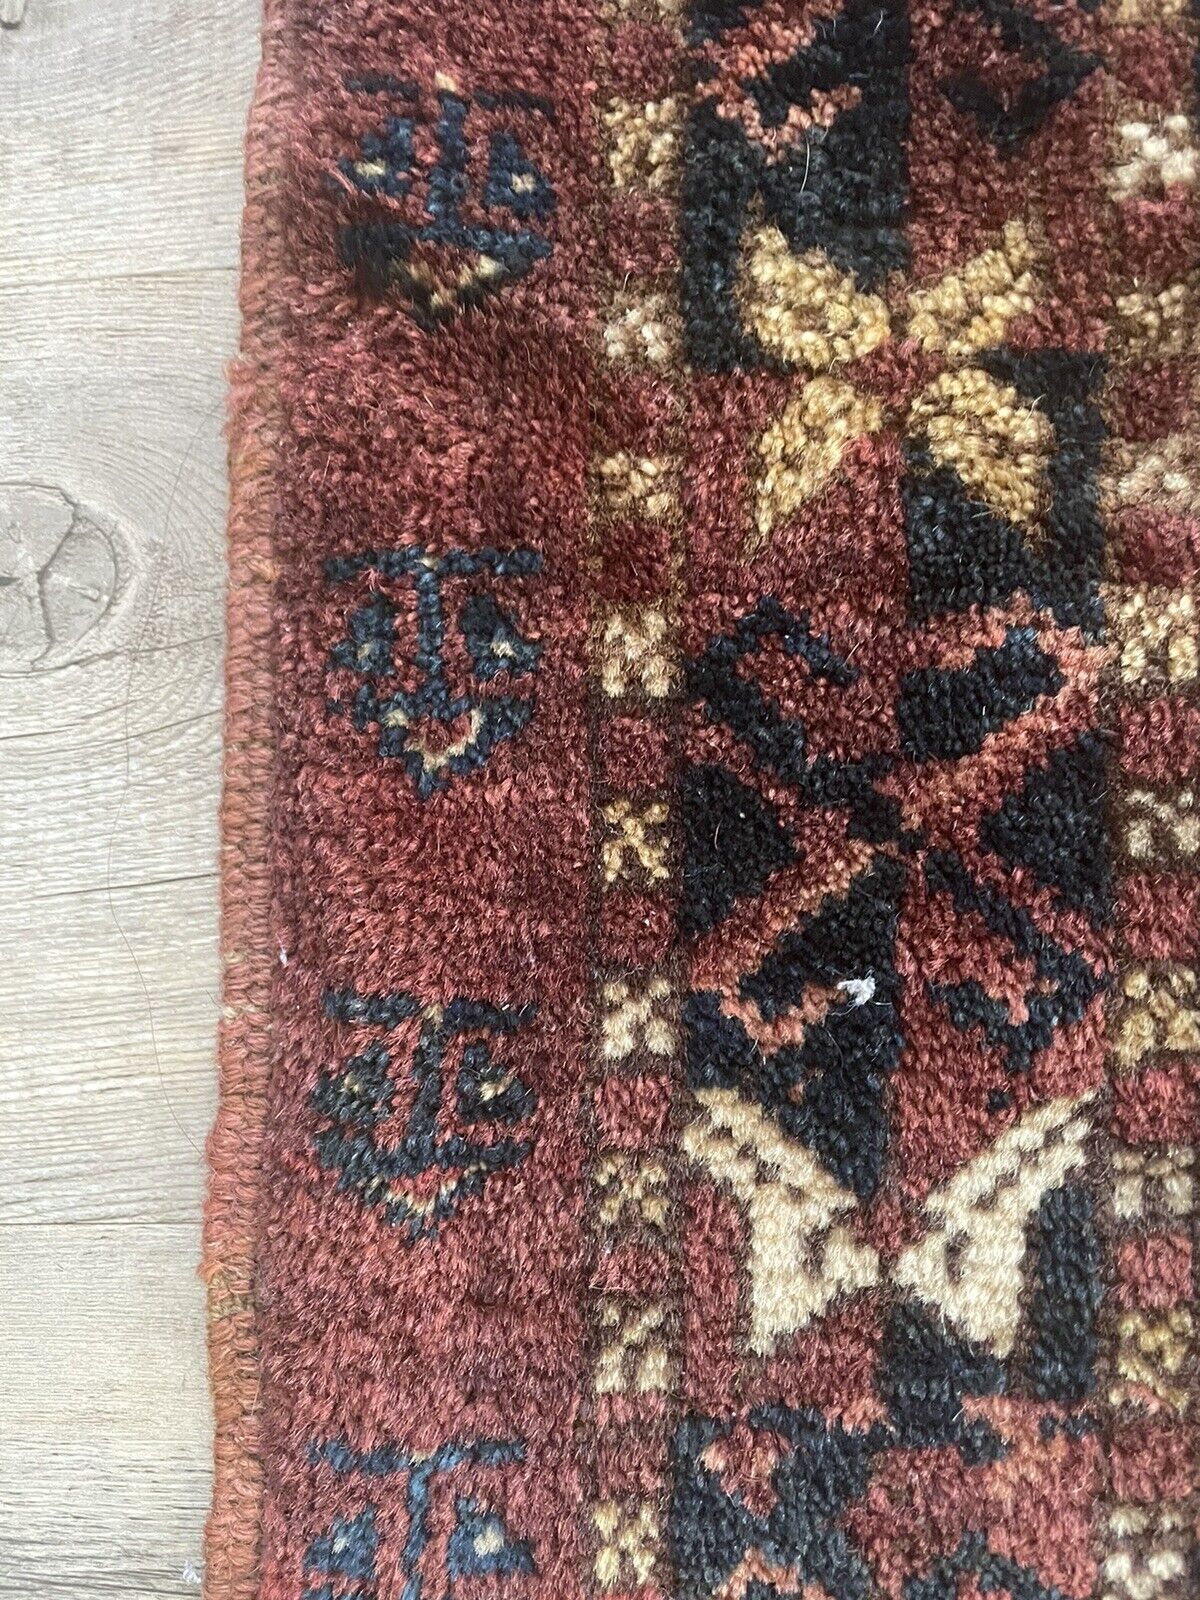 Close-up of geometric shapes on Handmade Antique Afghan Beshir Collectible Chuval Rug - Detailed view highlighting the geometric shapes and symmetrical motifs adorning the rug's surface, adding to its aesthetic appeal.